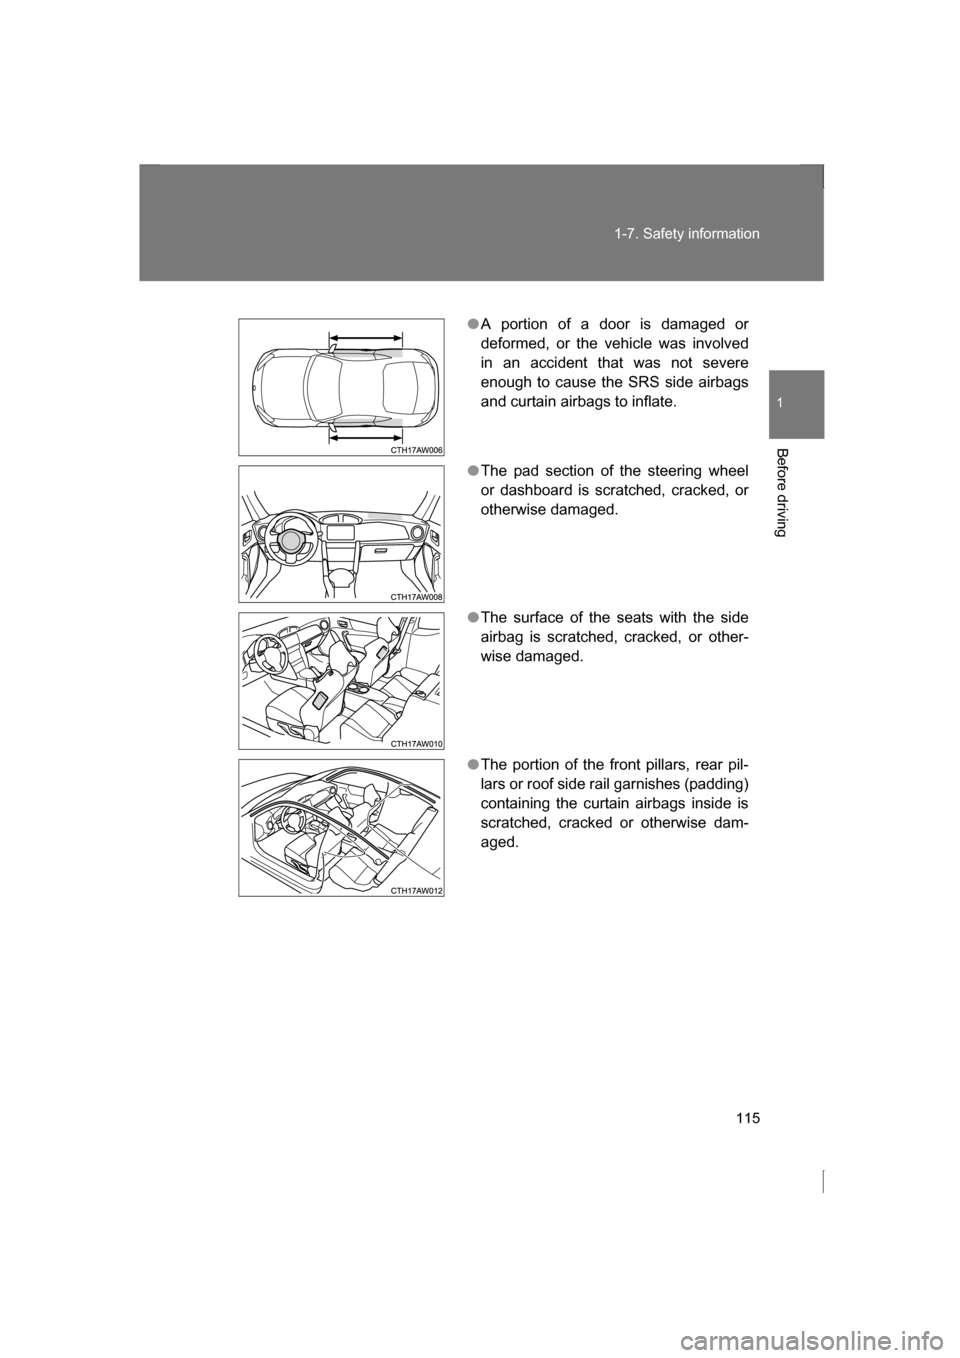 SUBARU BRZ 2013 1.G Owners Manual 115
1-7. Safety information
1
Before driving
●A portion of a door is damaged or 
deformed, or the vehicle was involved
in an accident that was not severe
enough to cause the SRS side airbags
and cur